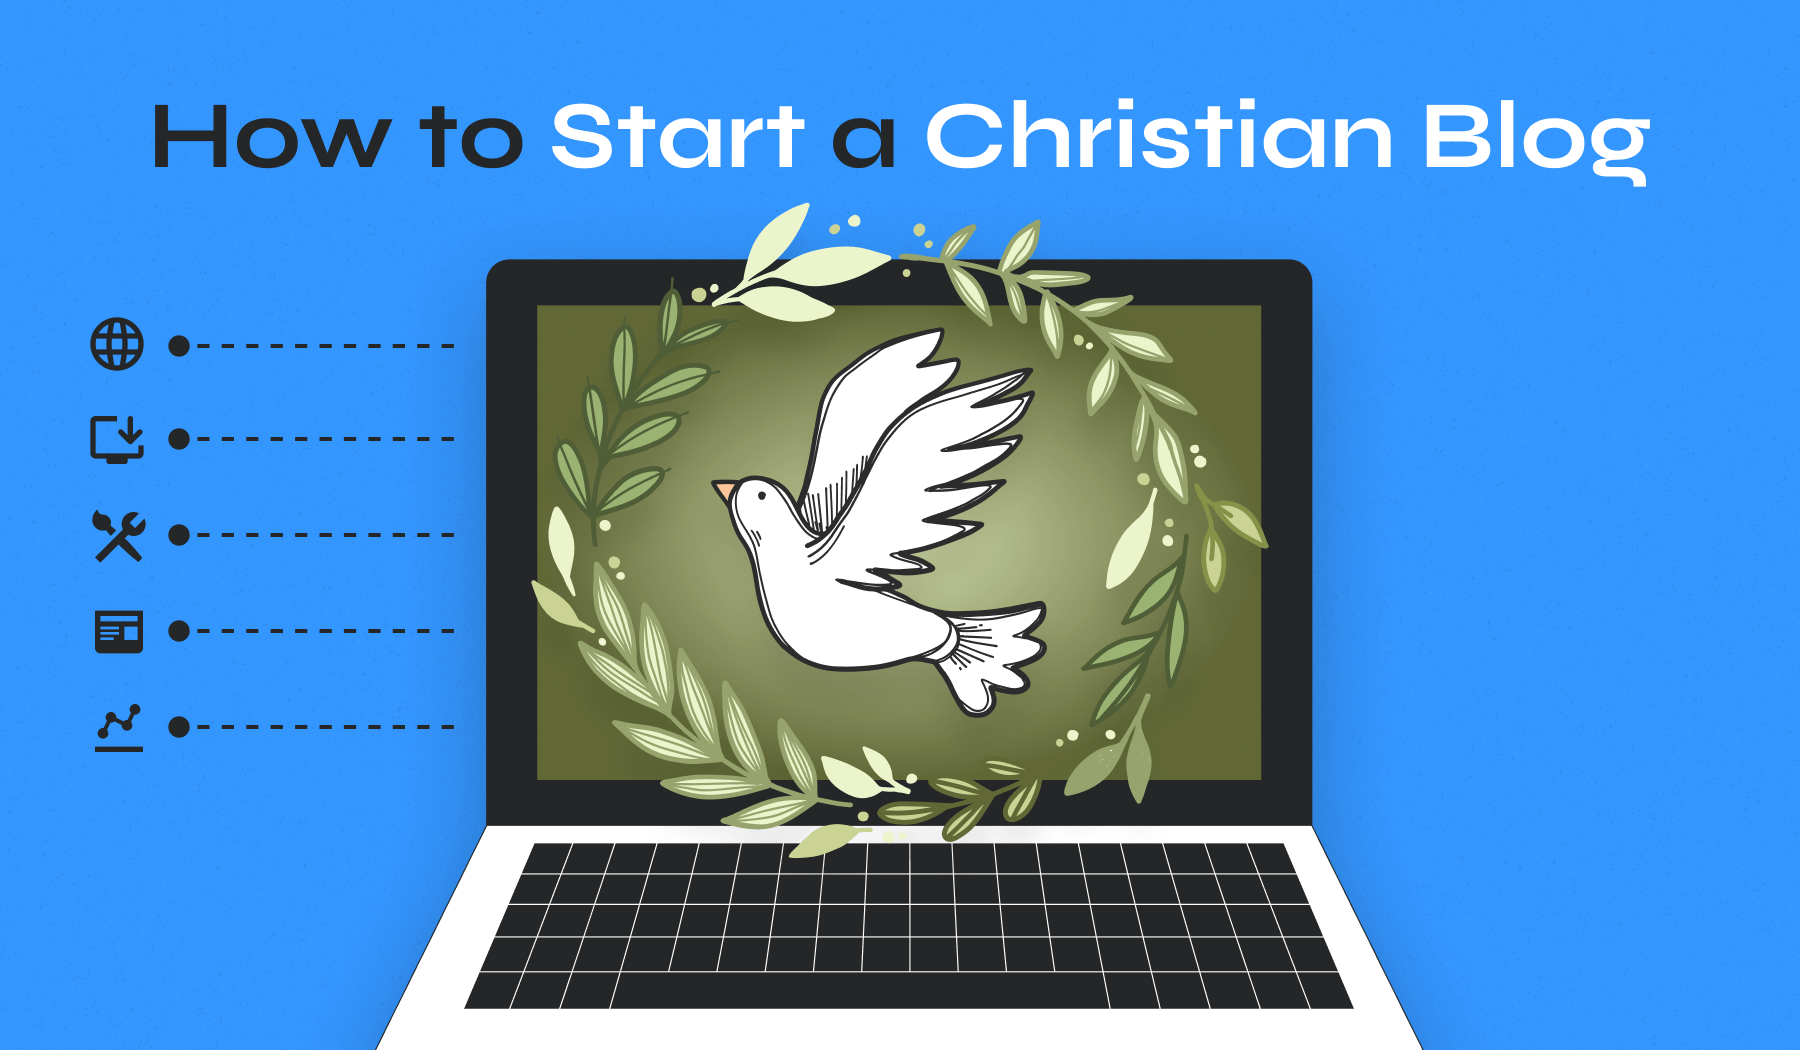 How to Start a Christian Blog